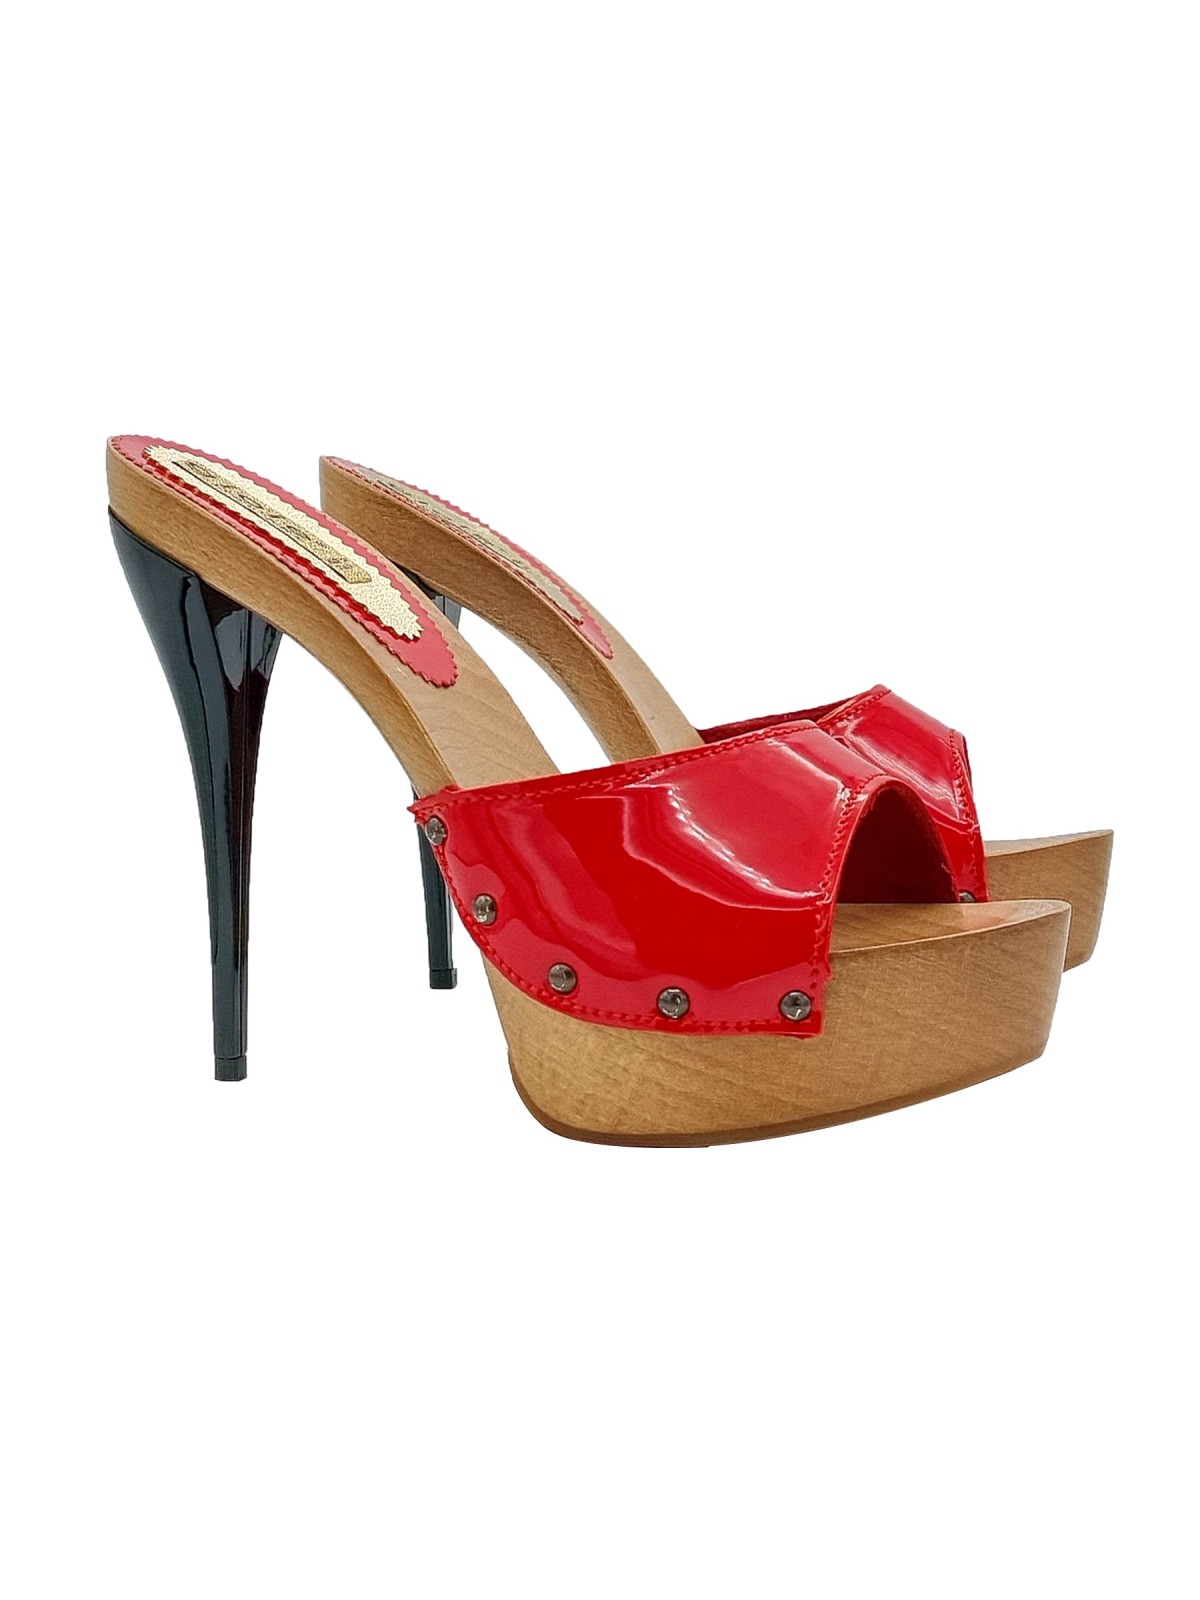 CLOGS IN RED PATENT WITH 14 CM HEEL